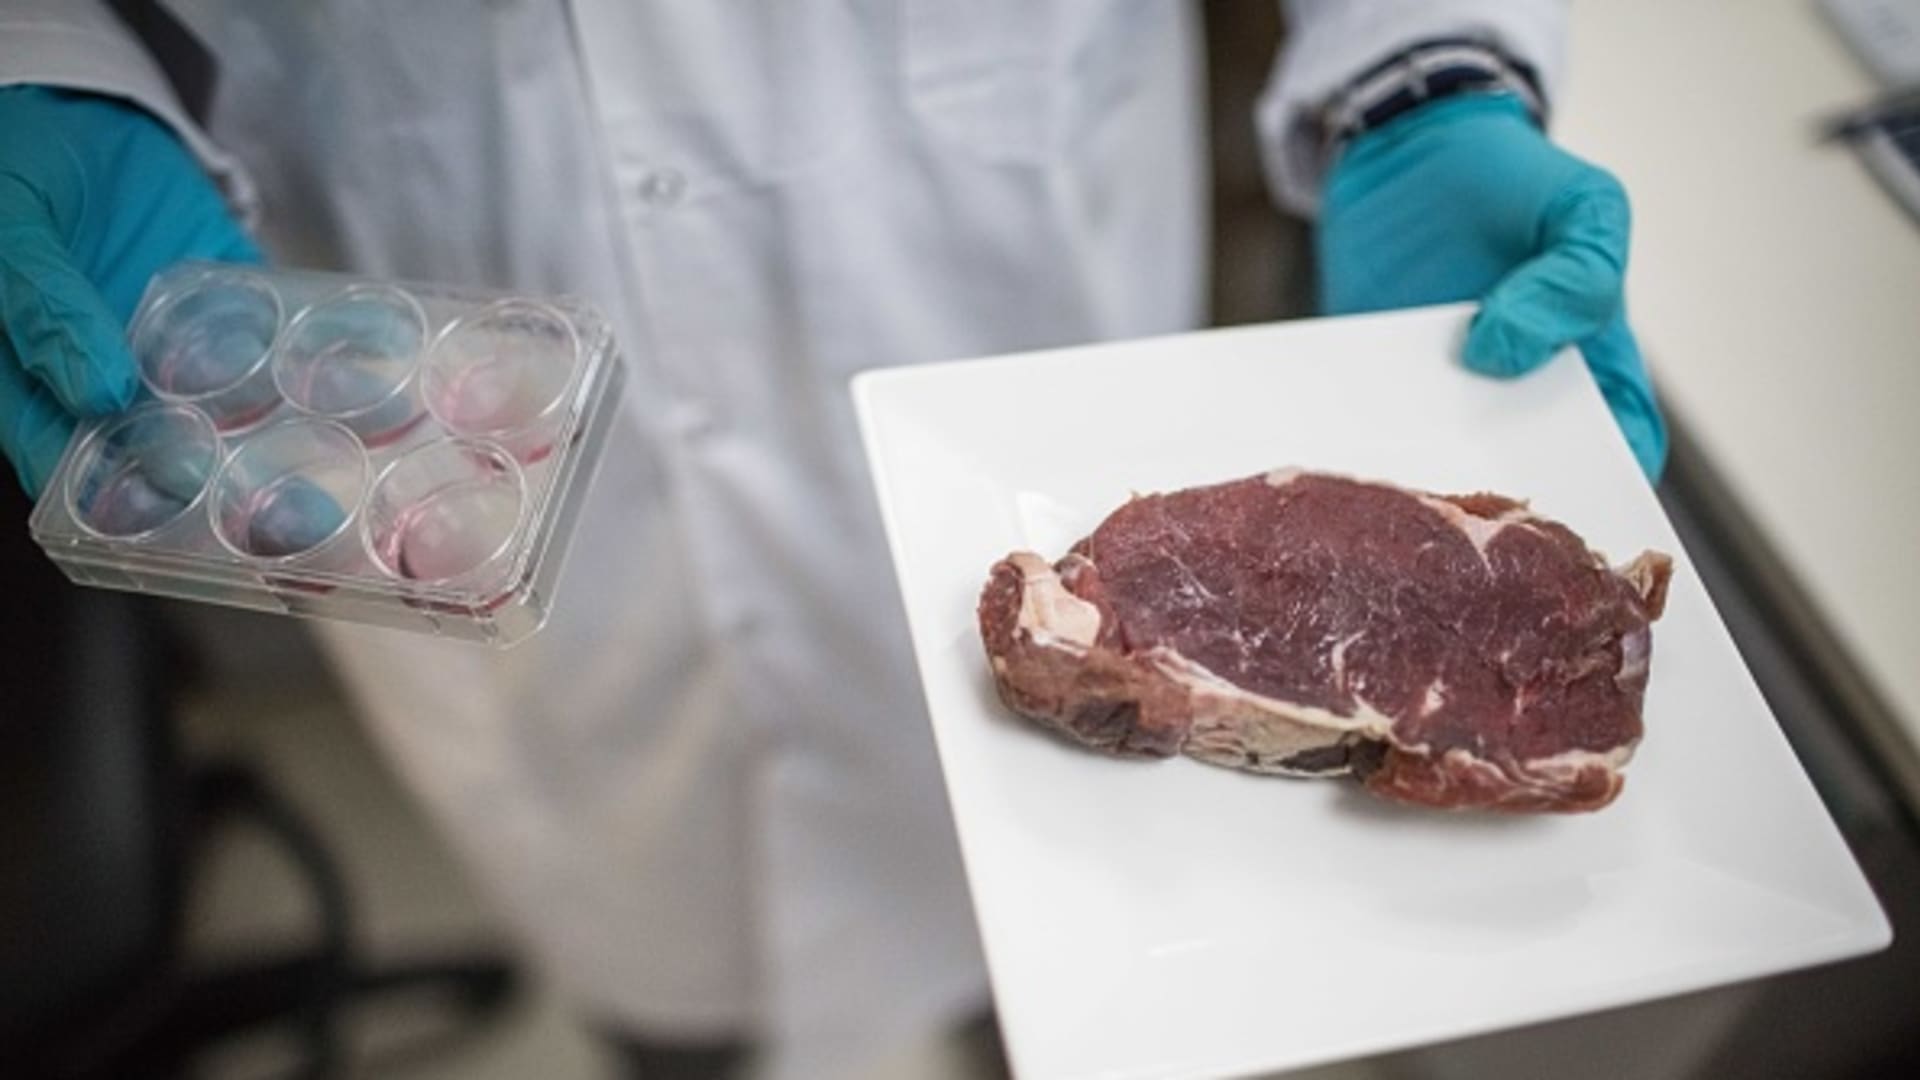 As the lab-grown meat industry grows, scientists debate if it could exacerbate climate change